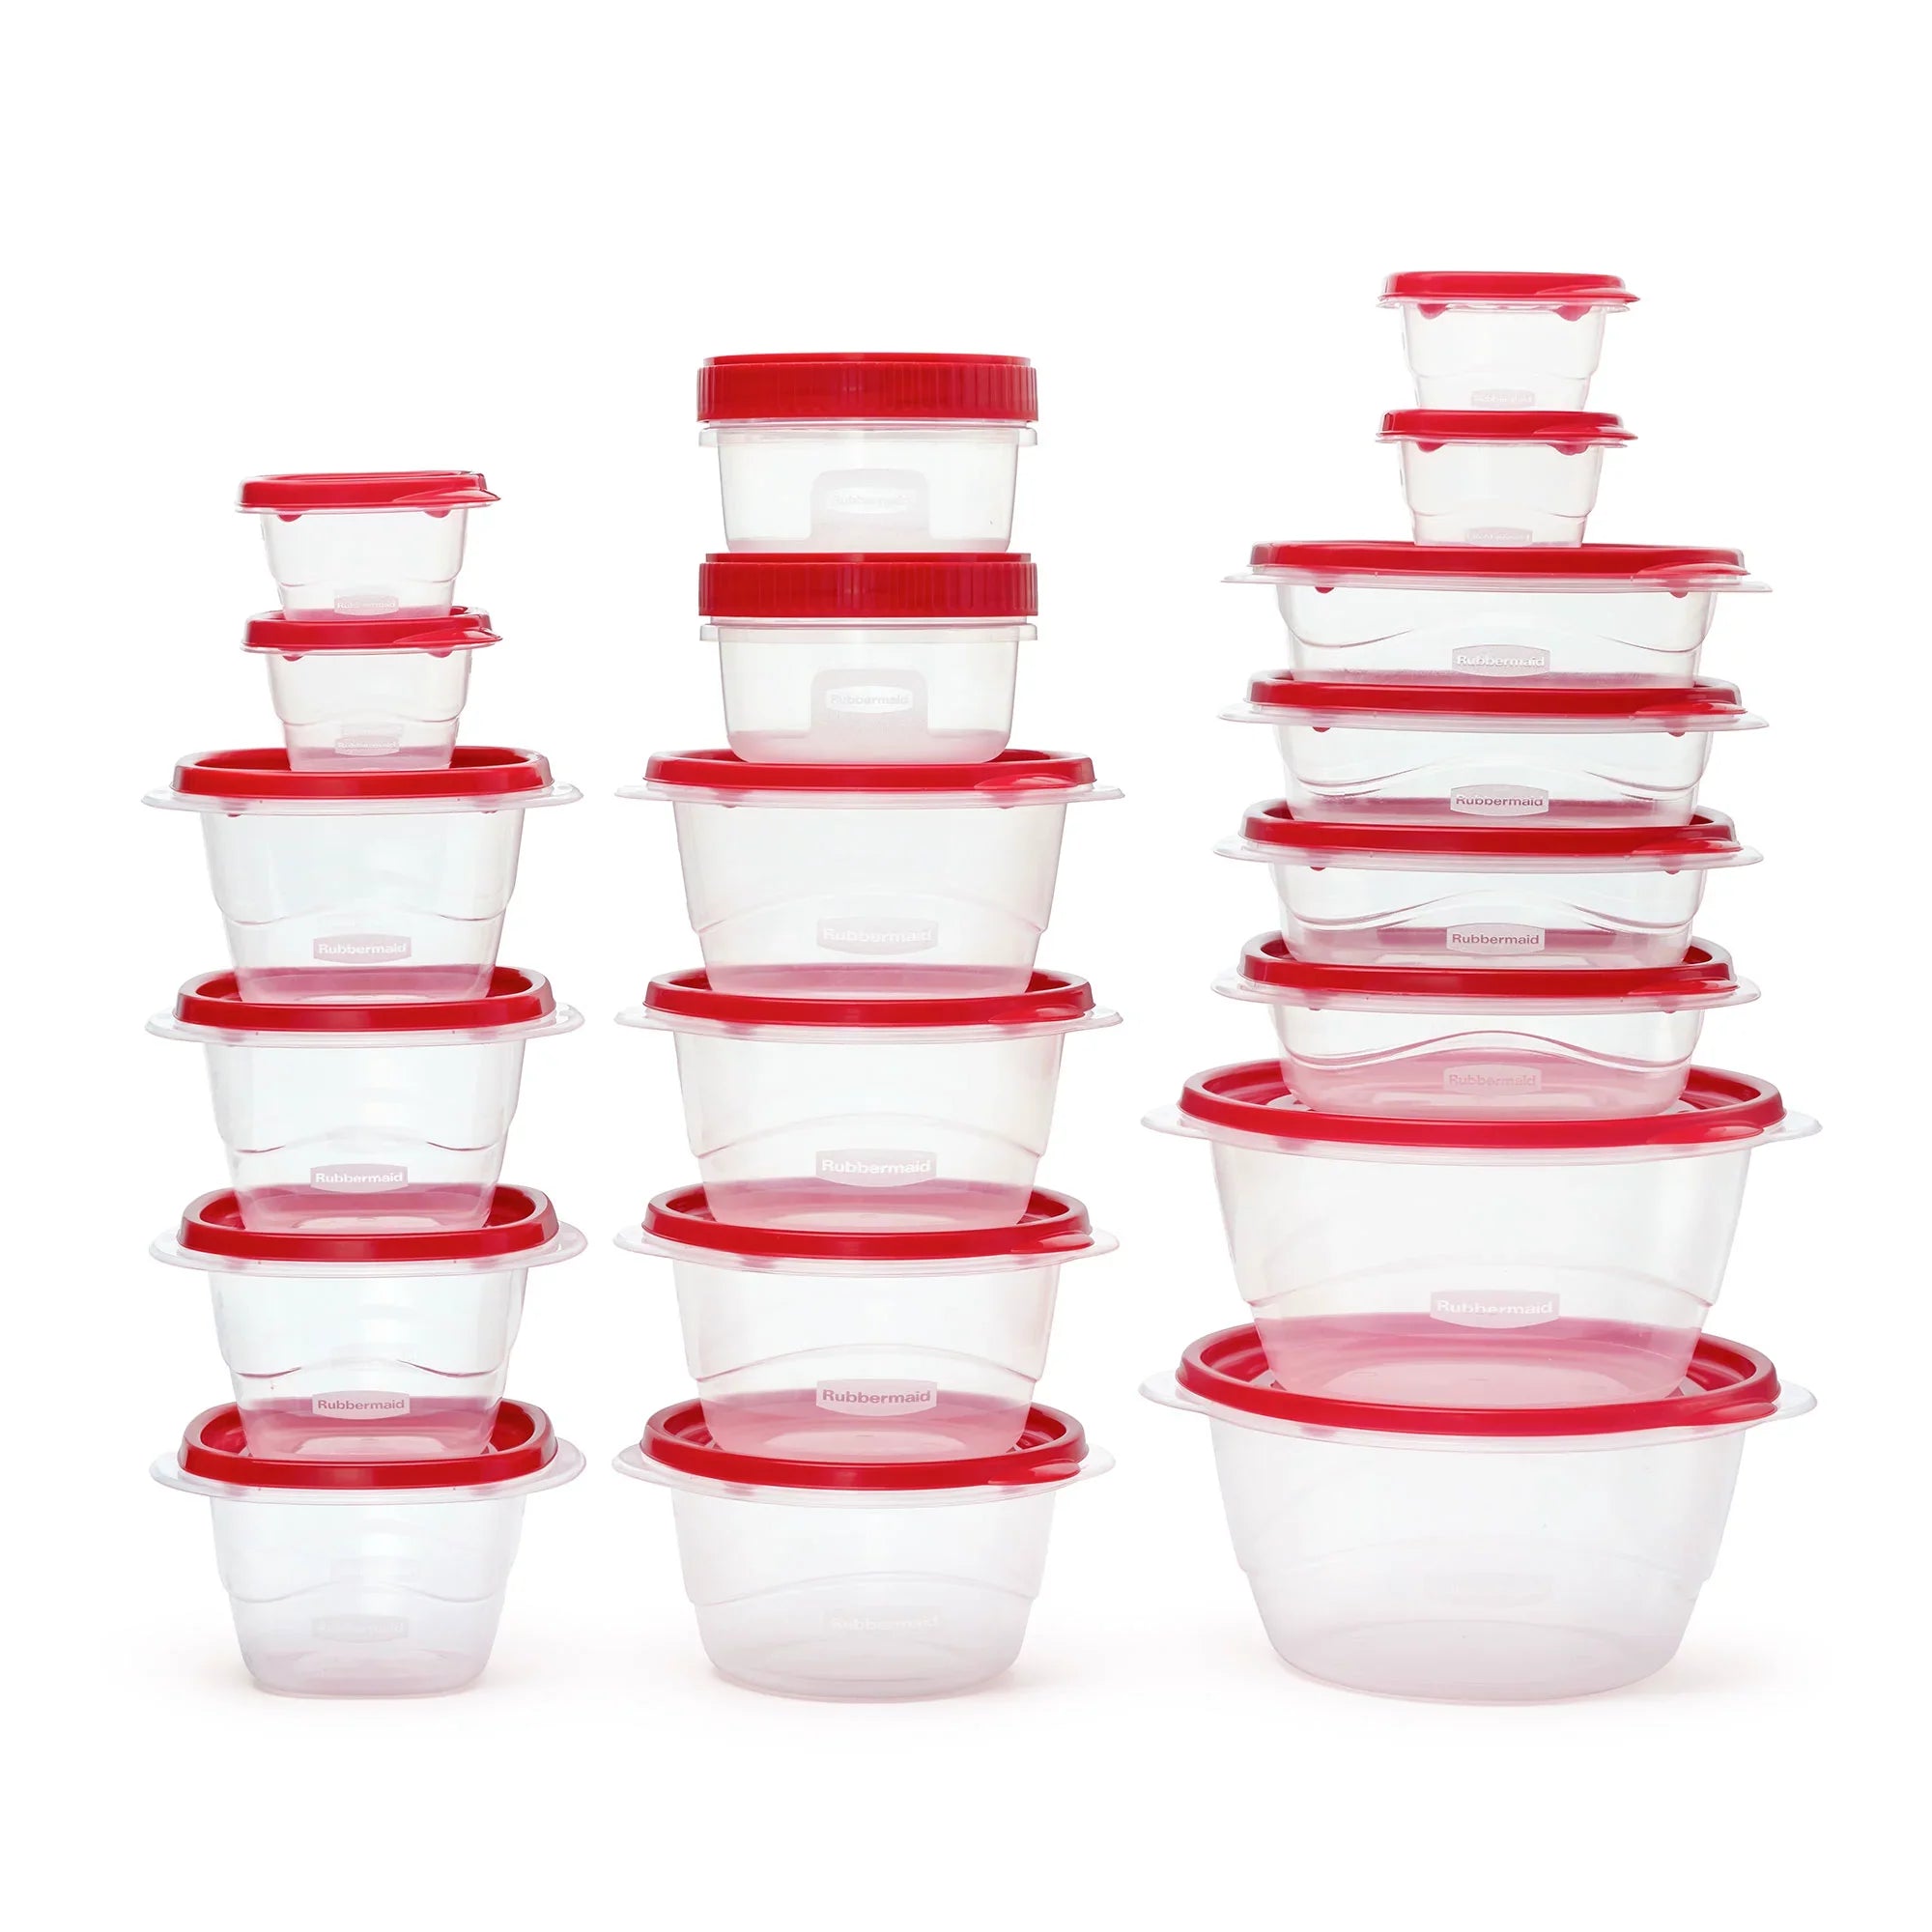 Wholesale prices with free shipping all over United States Rubbermaid TakeAlongs 40 Piece Food Storage Set, Red, Total of 12.6 Qts - Steven Deals